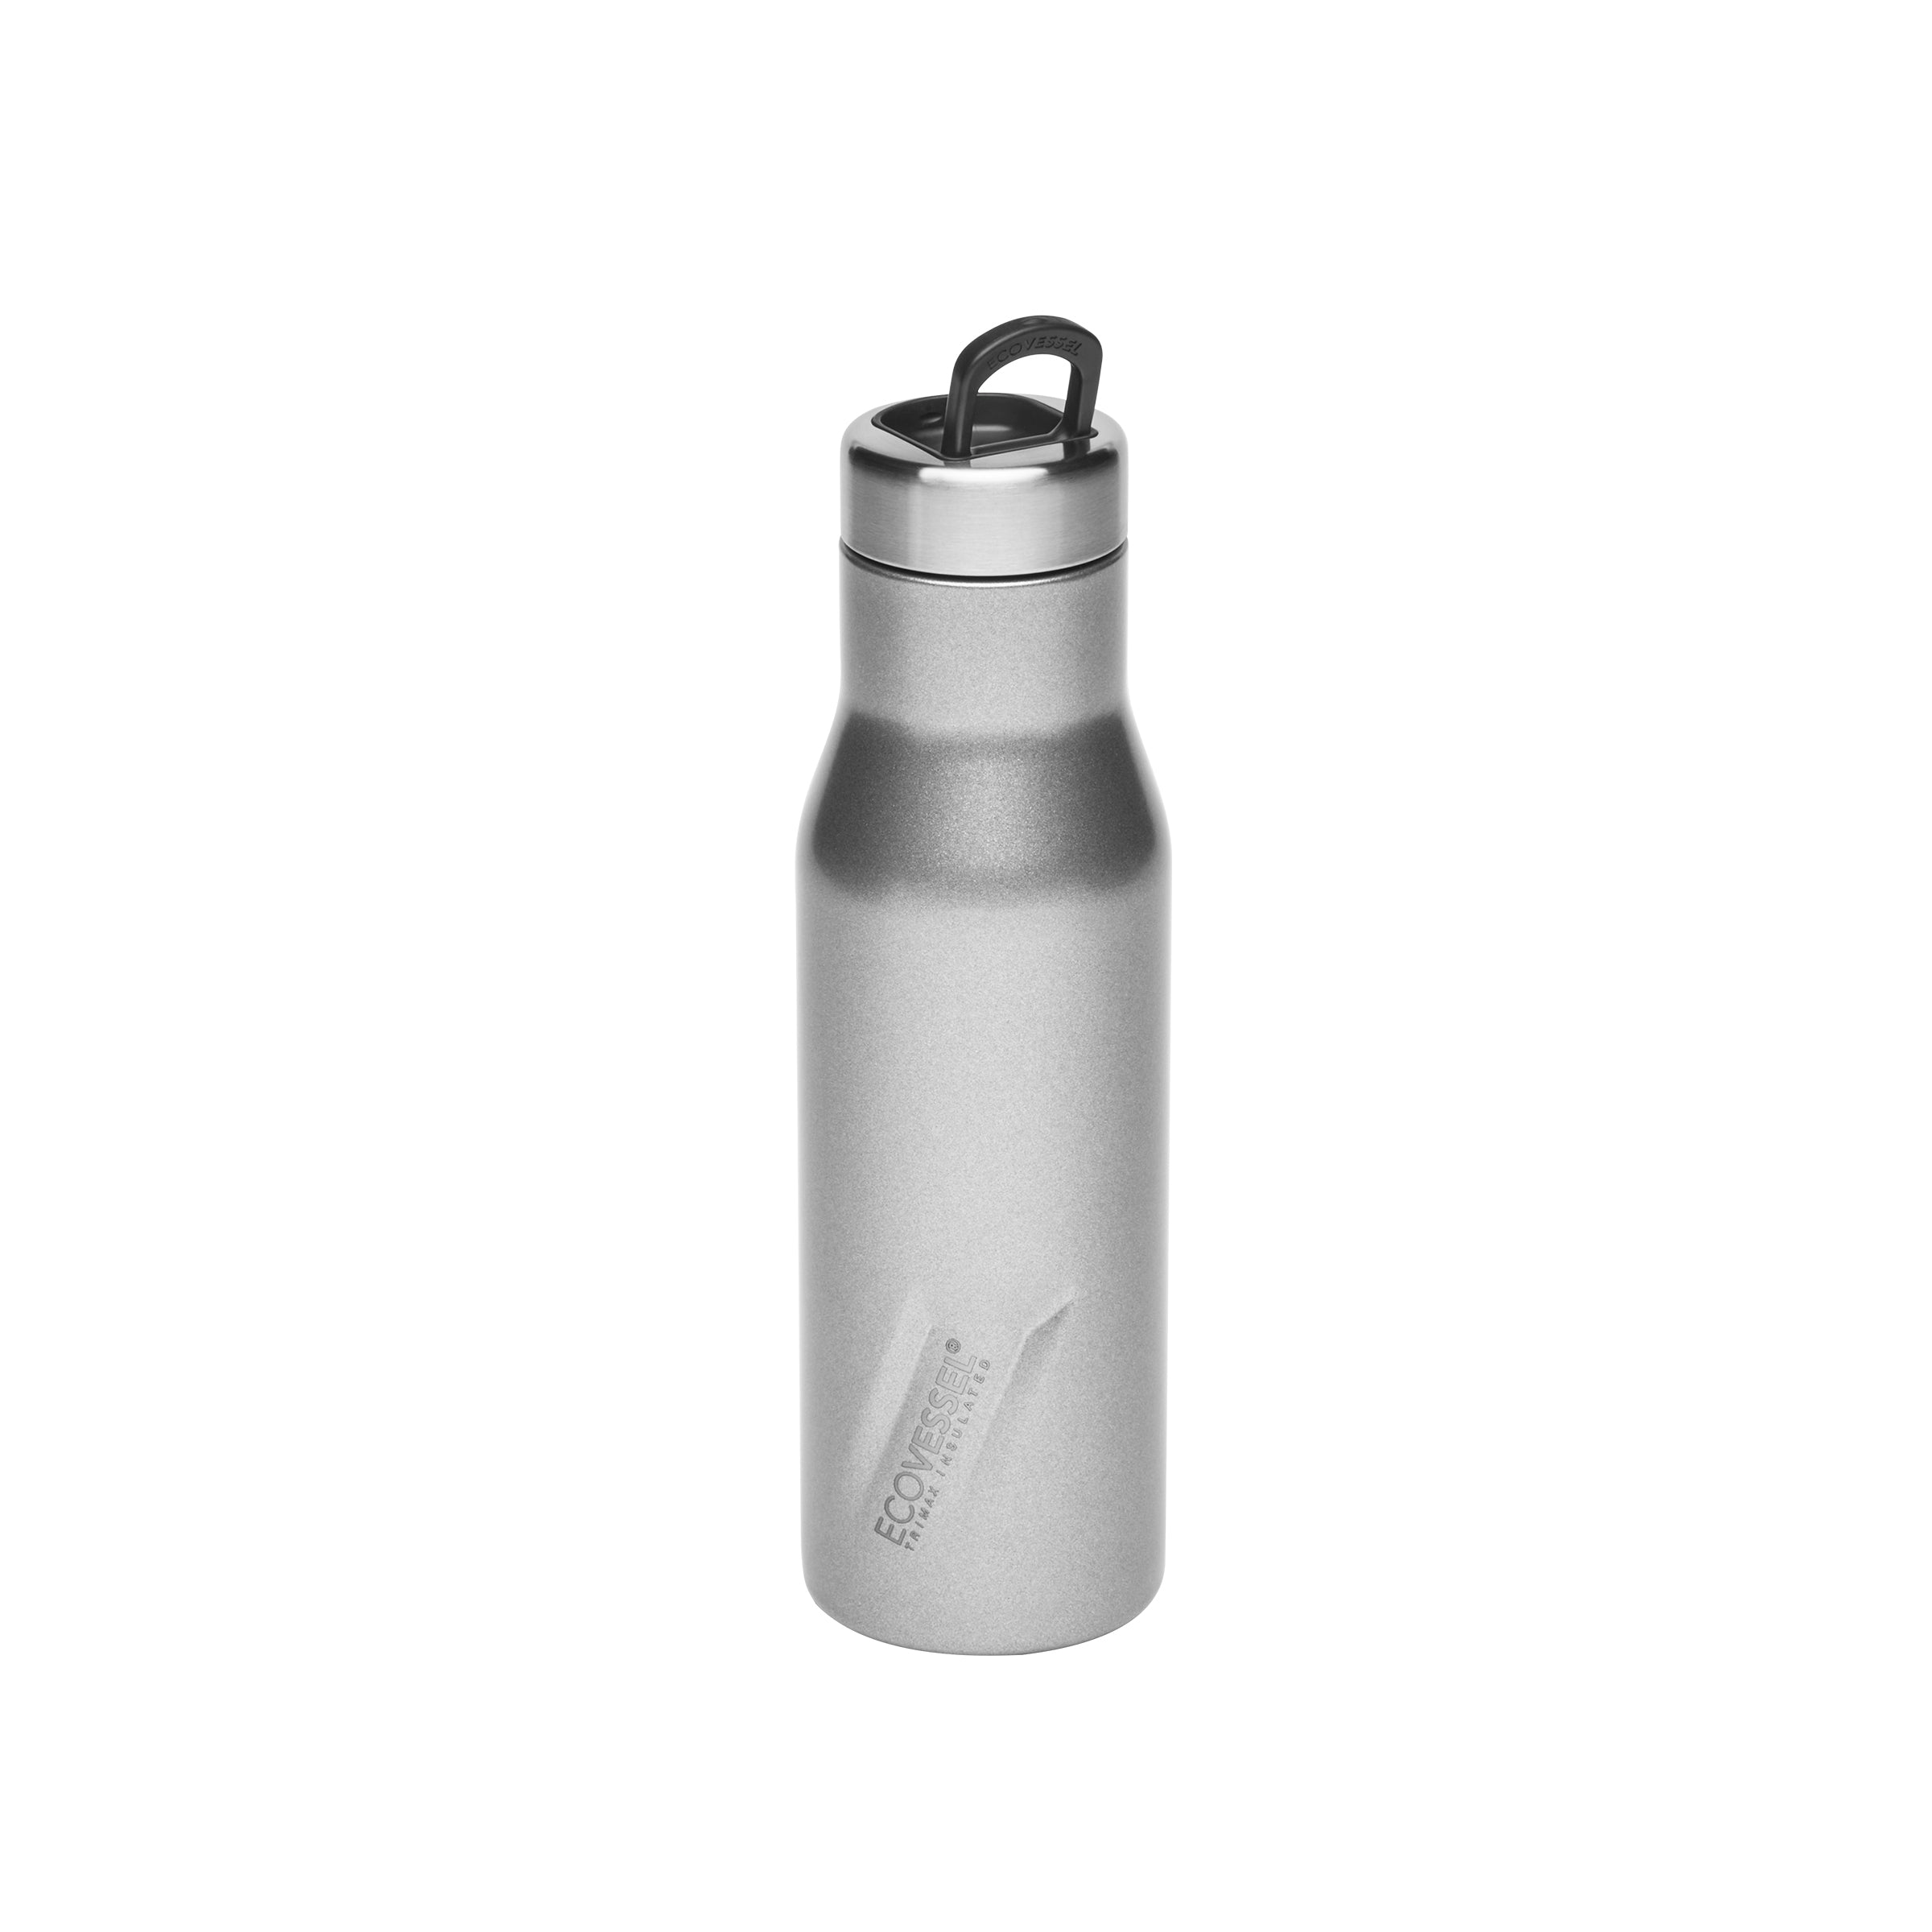 EcoVessel New! 2022 Aspen - Insulated Stainless Steel Water & Wine Bottle with Hidden Handle - 16oz, Gray Smoke